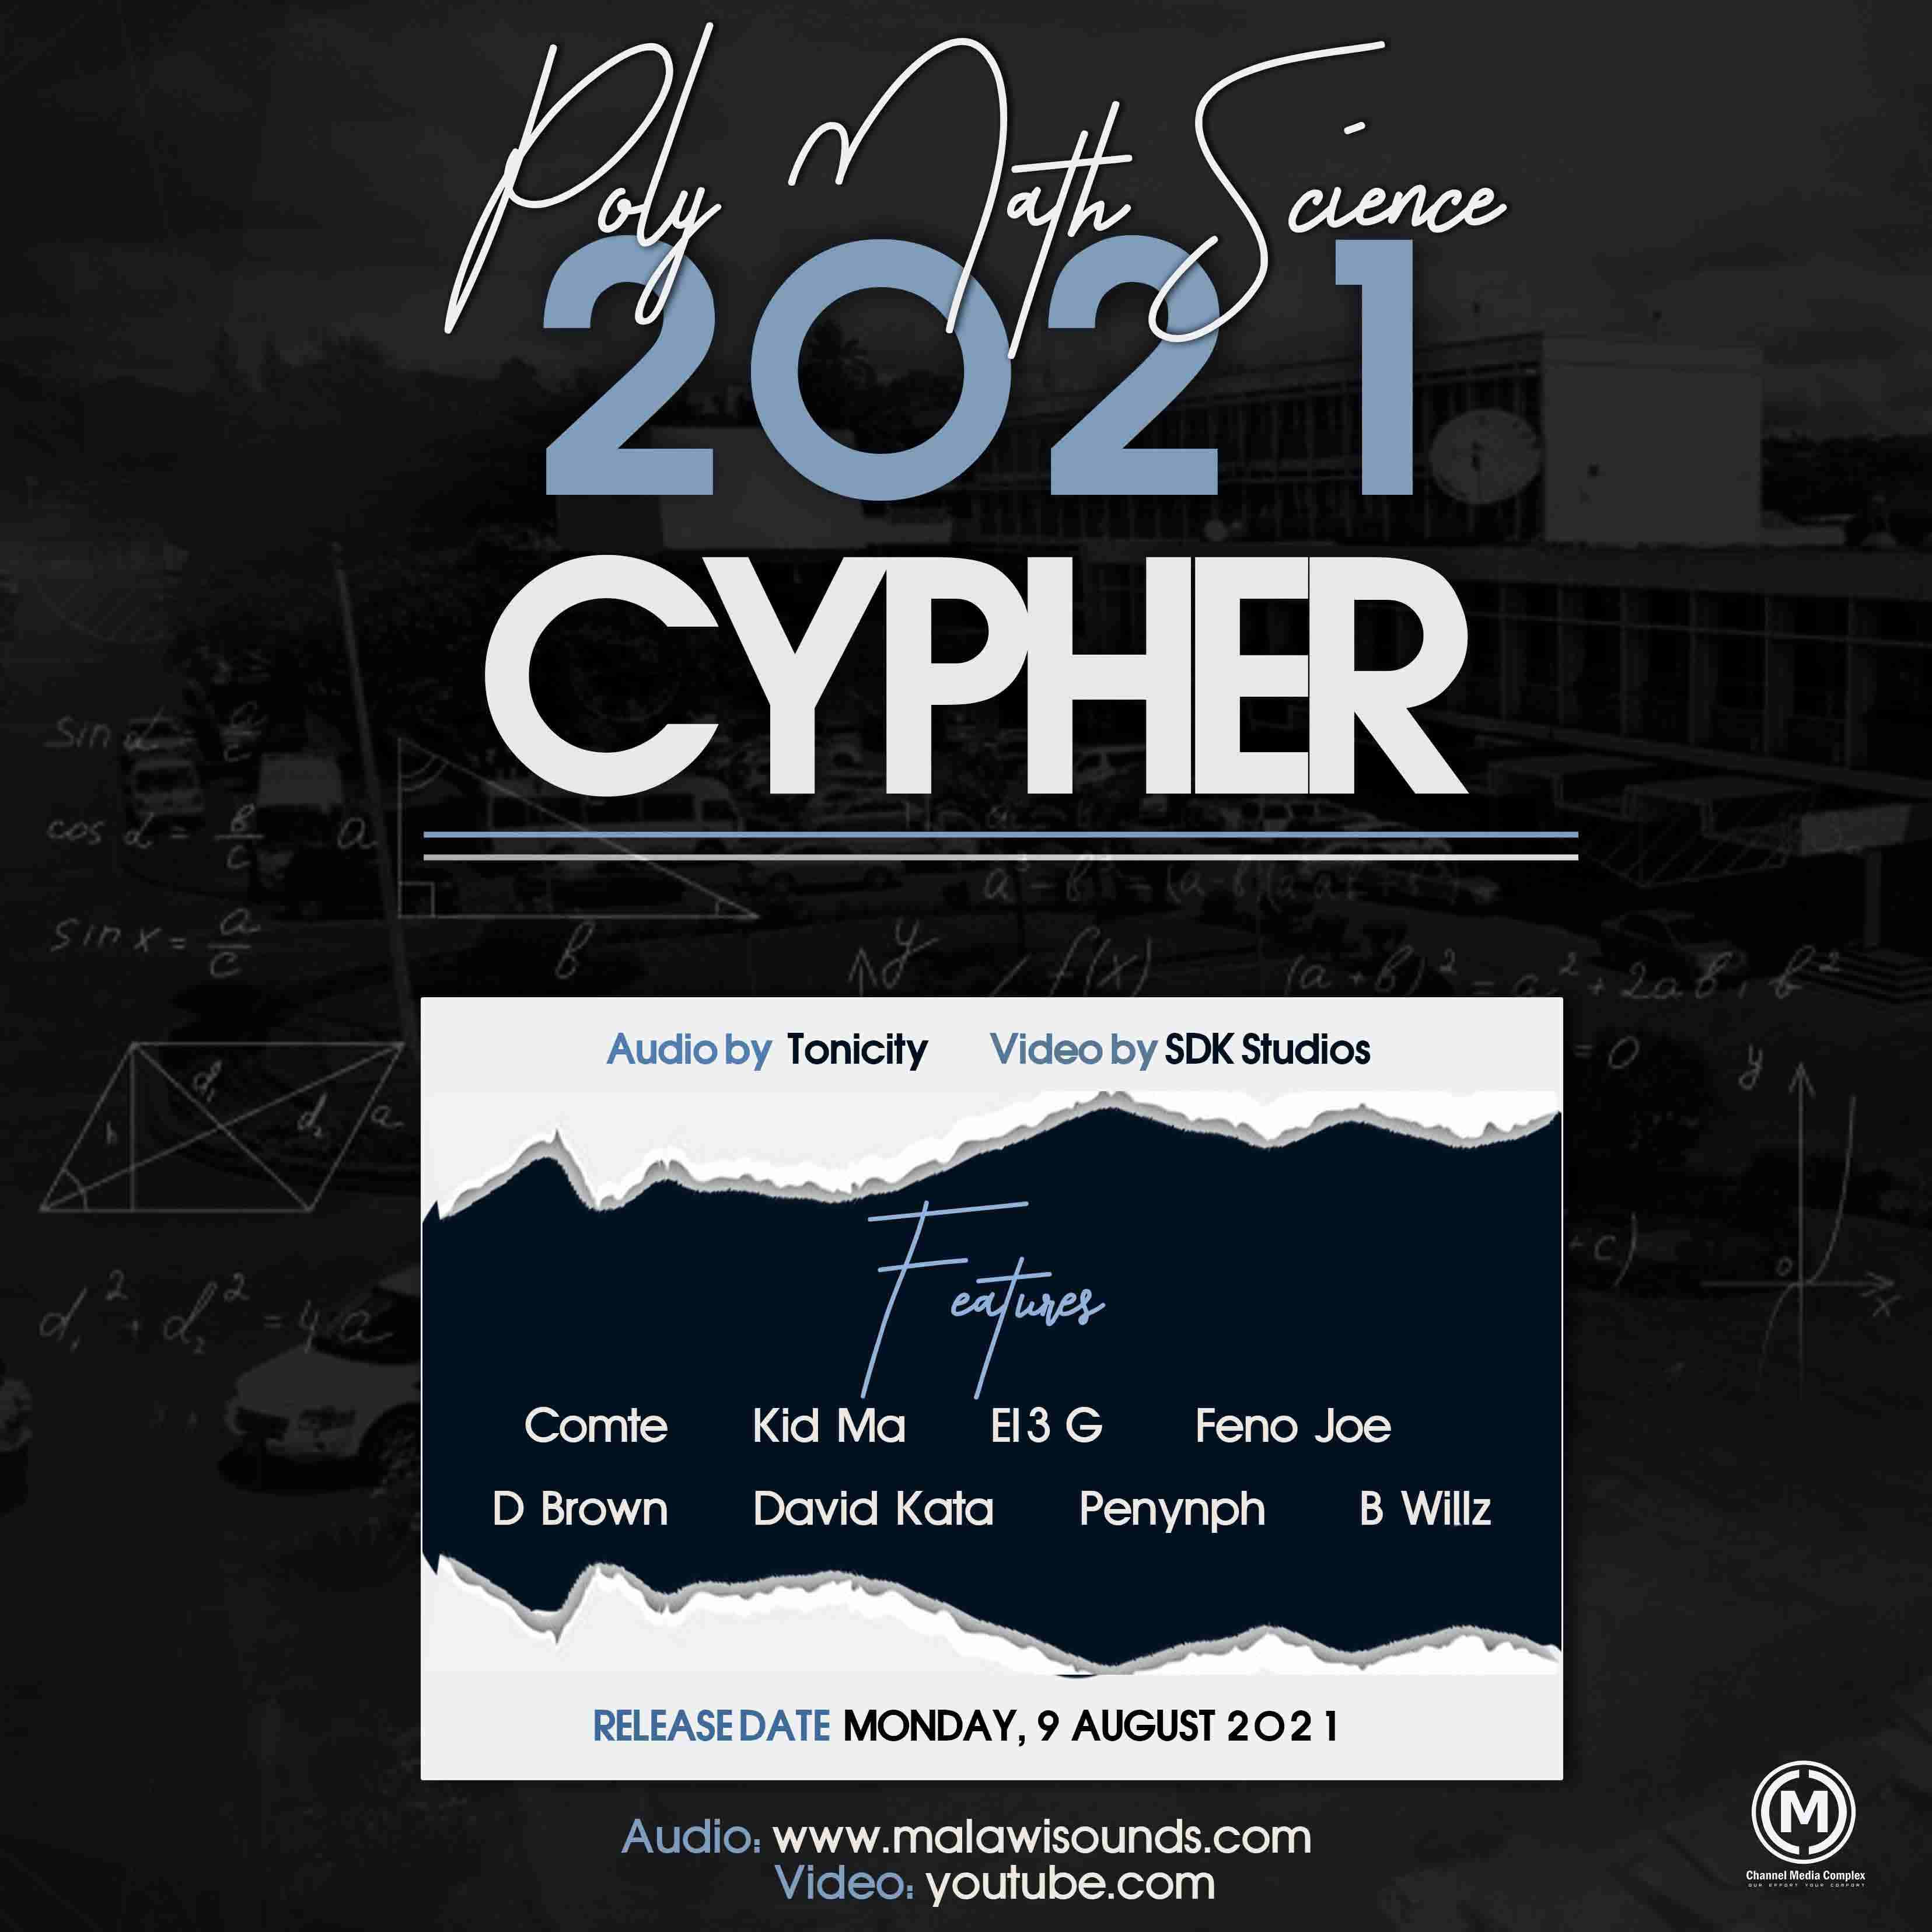 Poly Math Science Cypher 2021